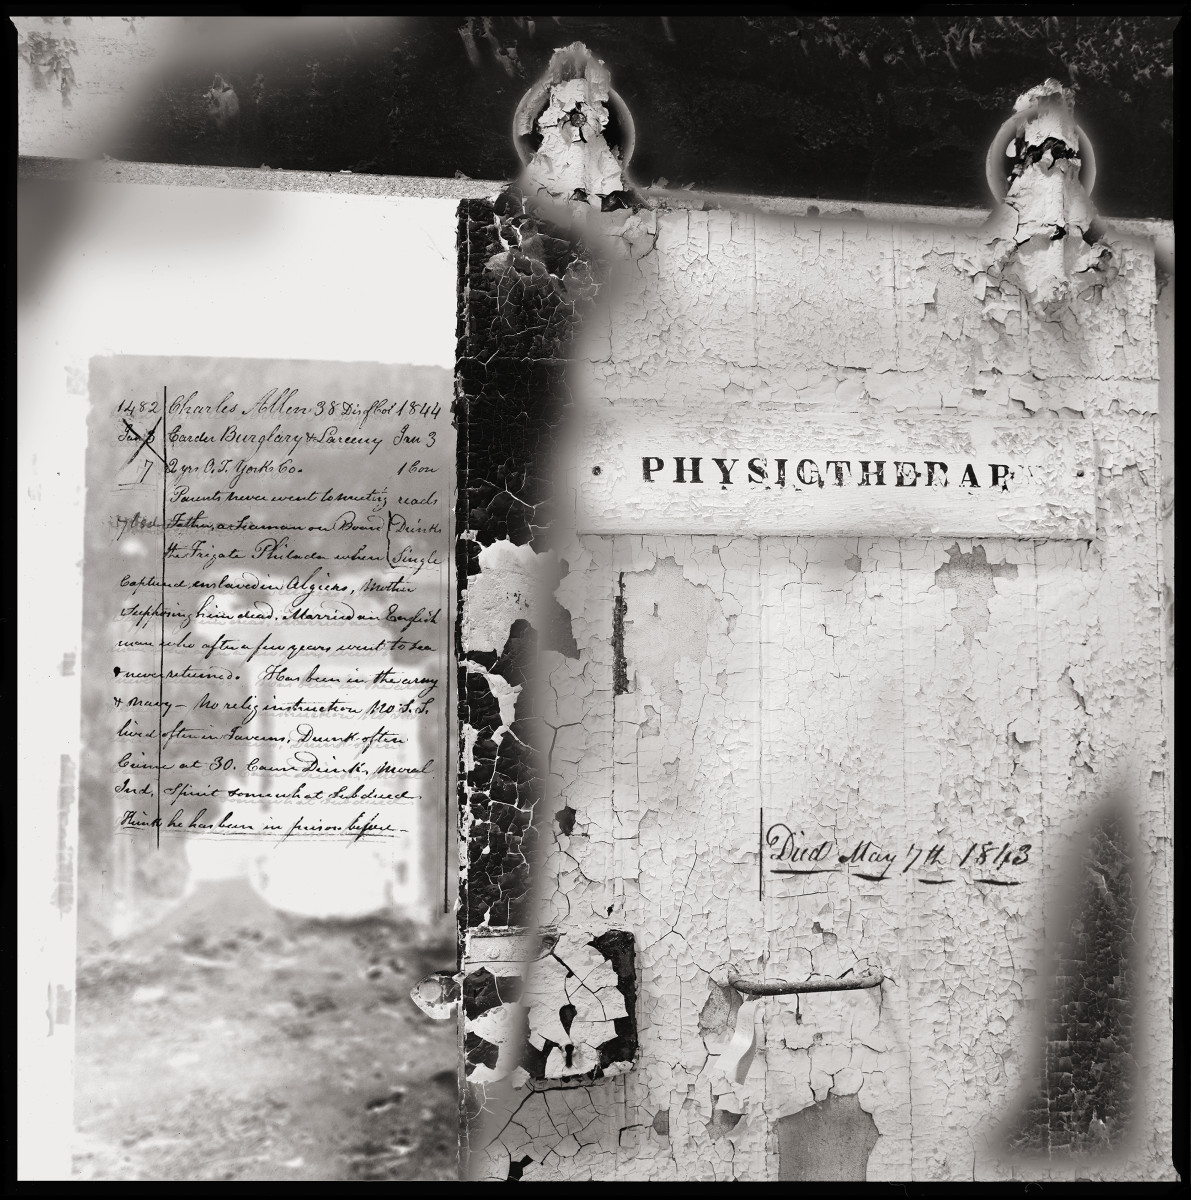 Physiotherapy by Eric T. Kunsman  Image: ID: A black and white image shows a board on the right reading "Physiotherapy".  On the left is a paper with black cursive writing.